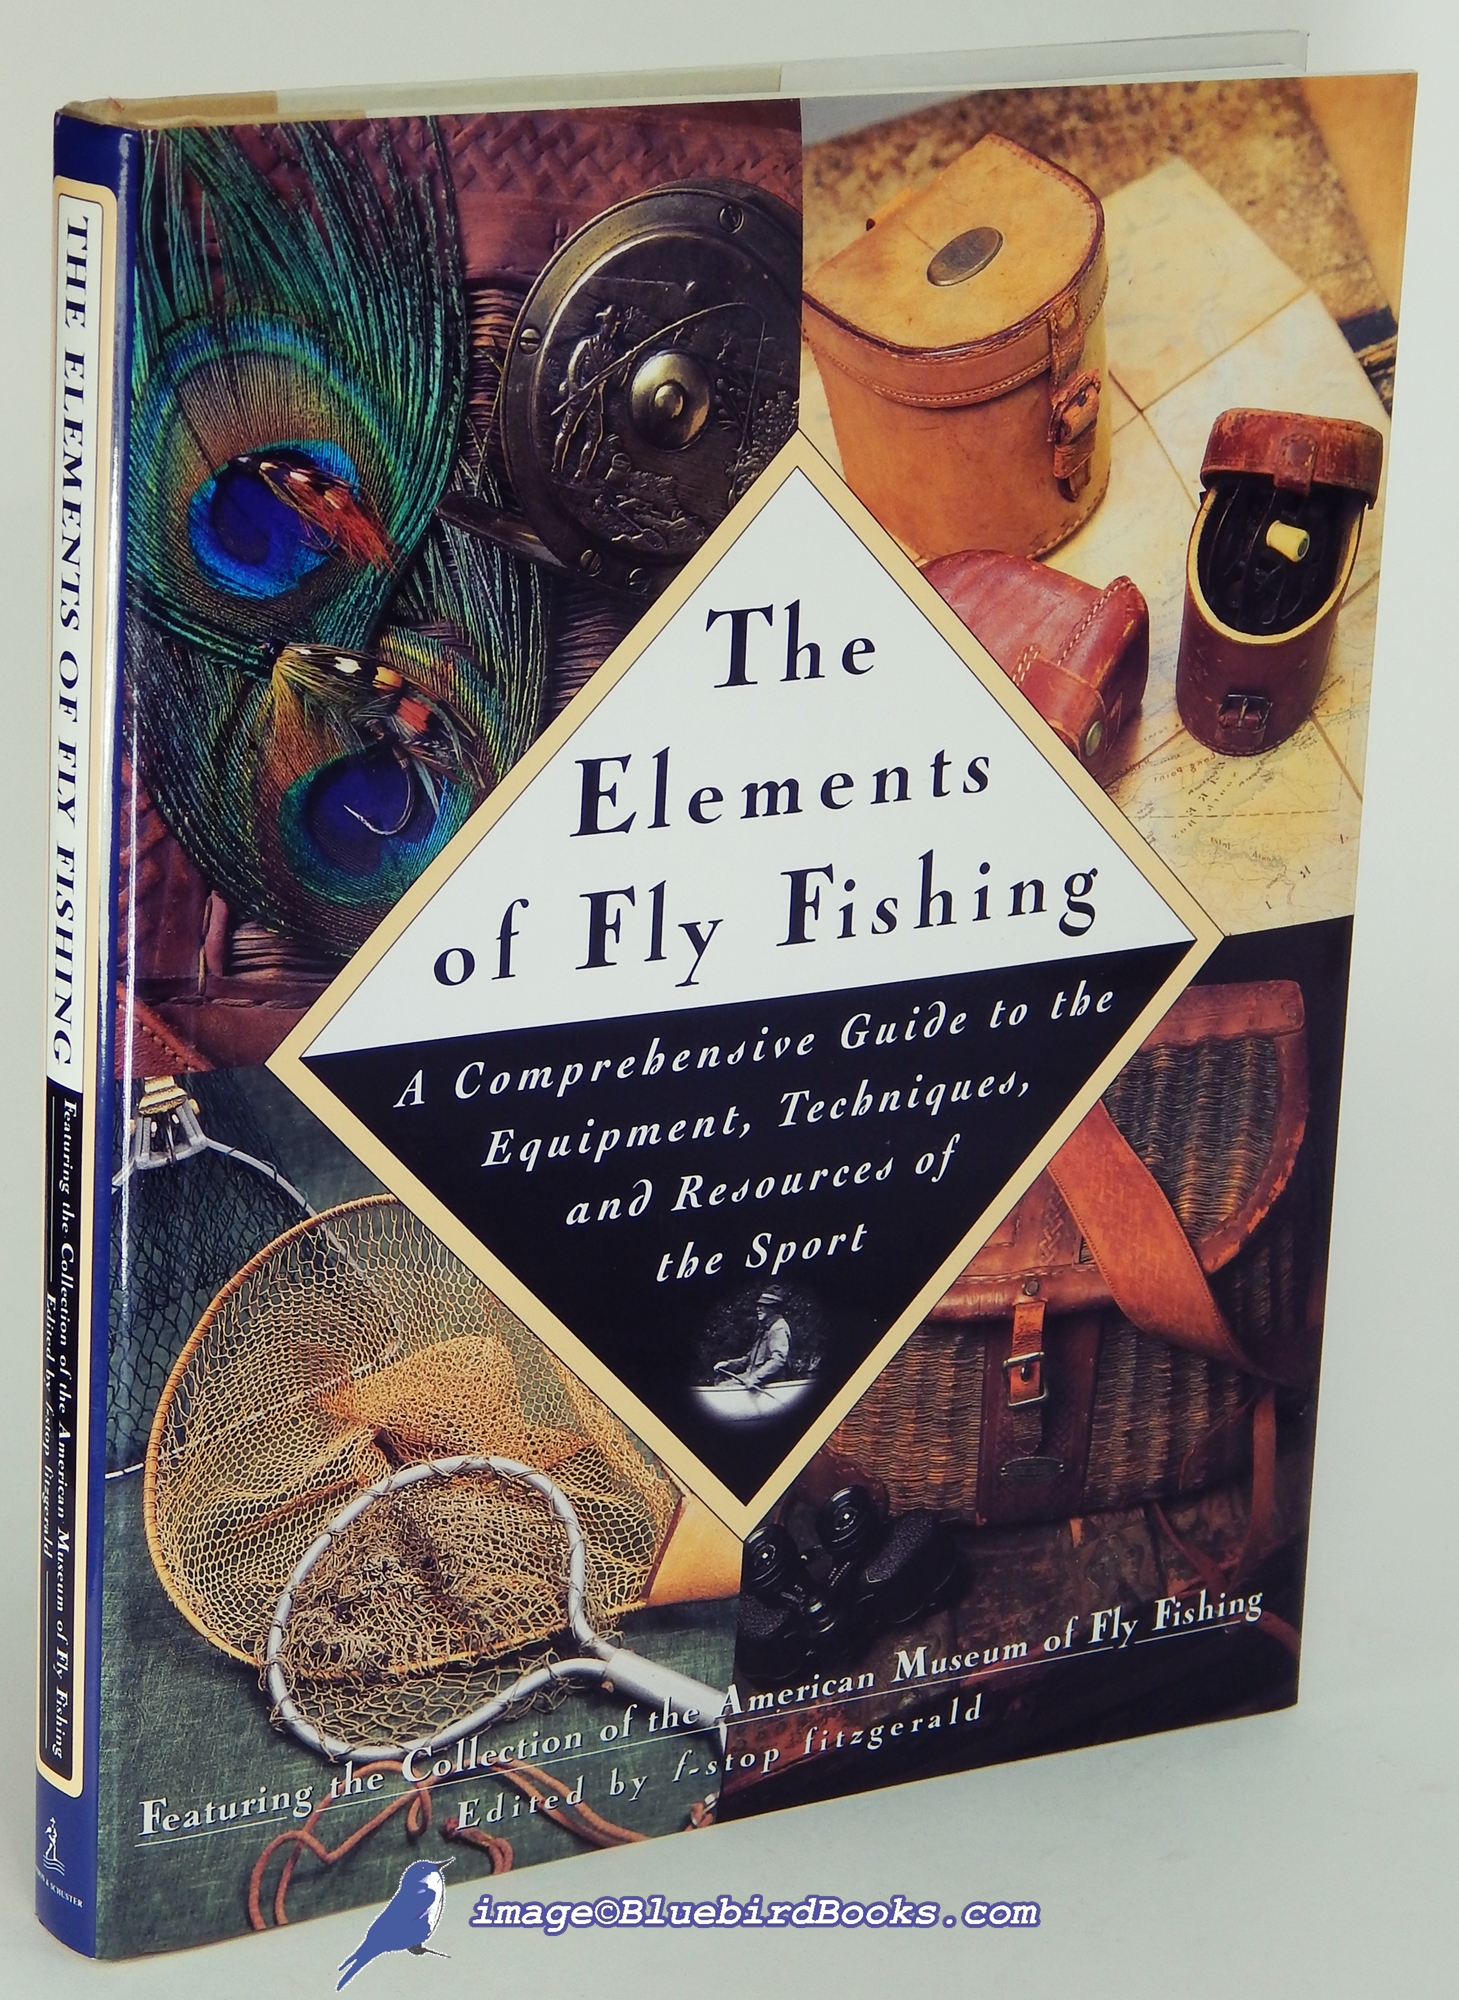 The Elements of Fly Fishing: A Comprehensive Guide to the Equipment,  Techniques, and Resources of the Sport